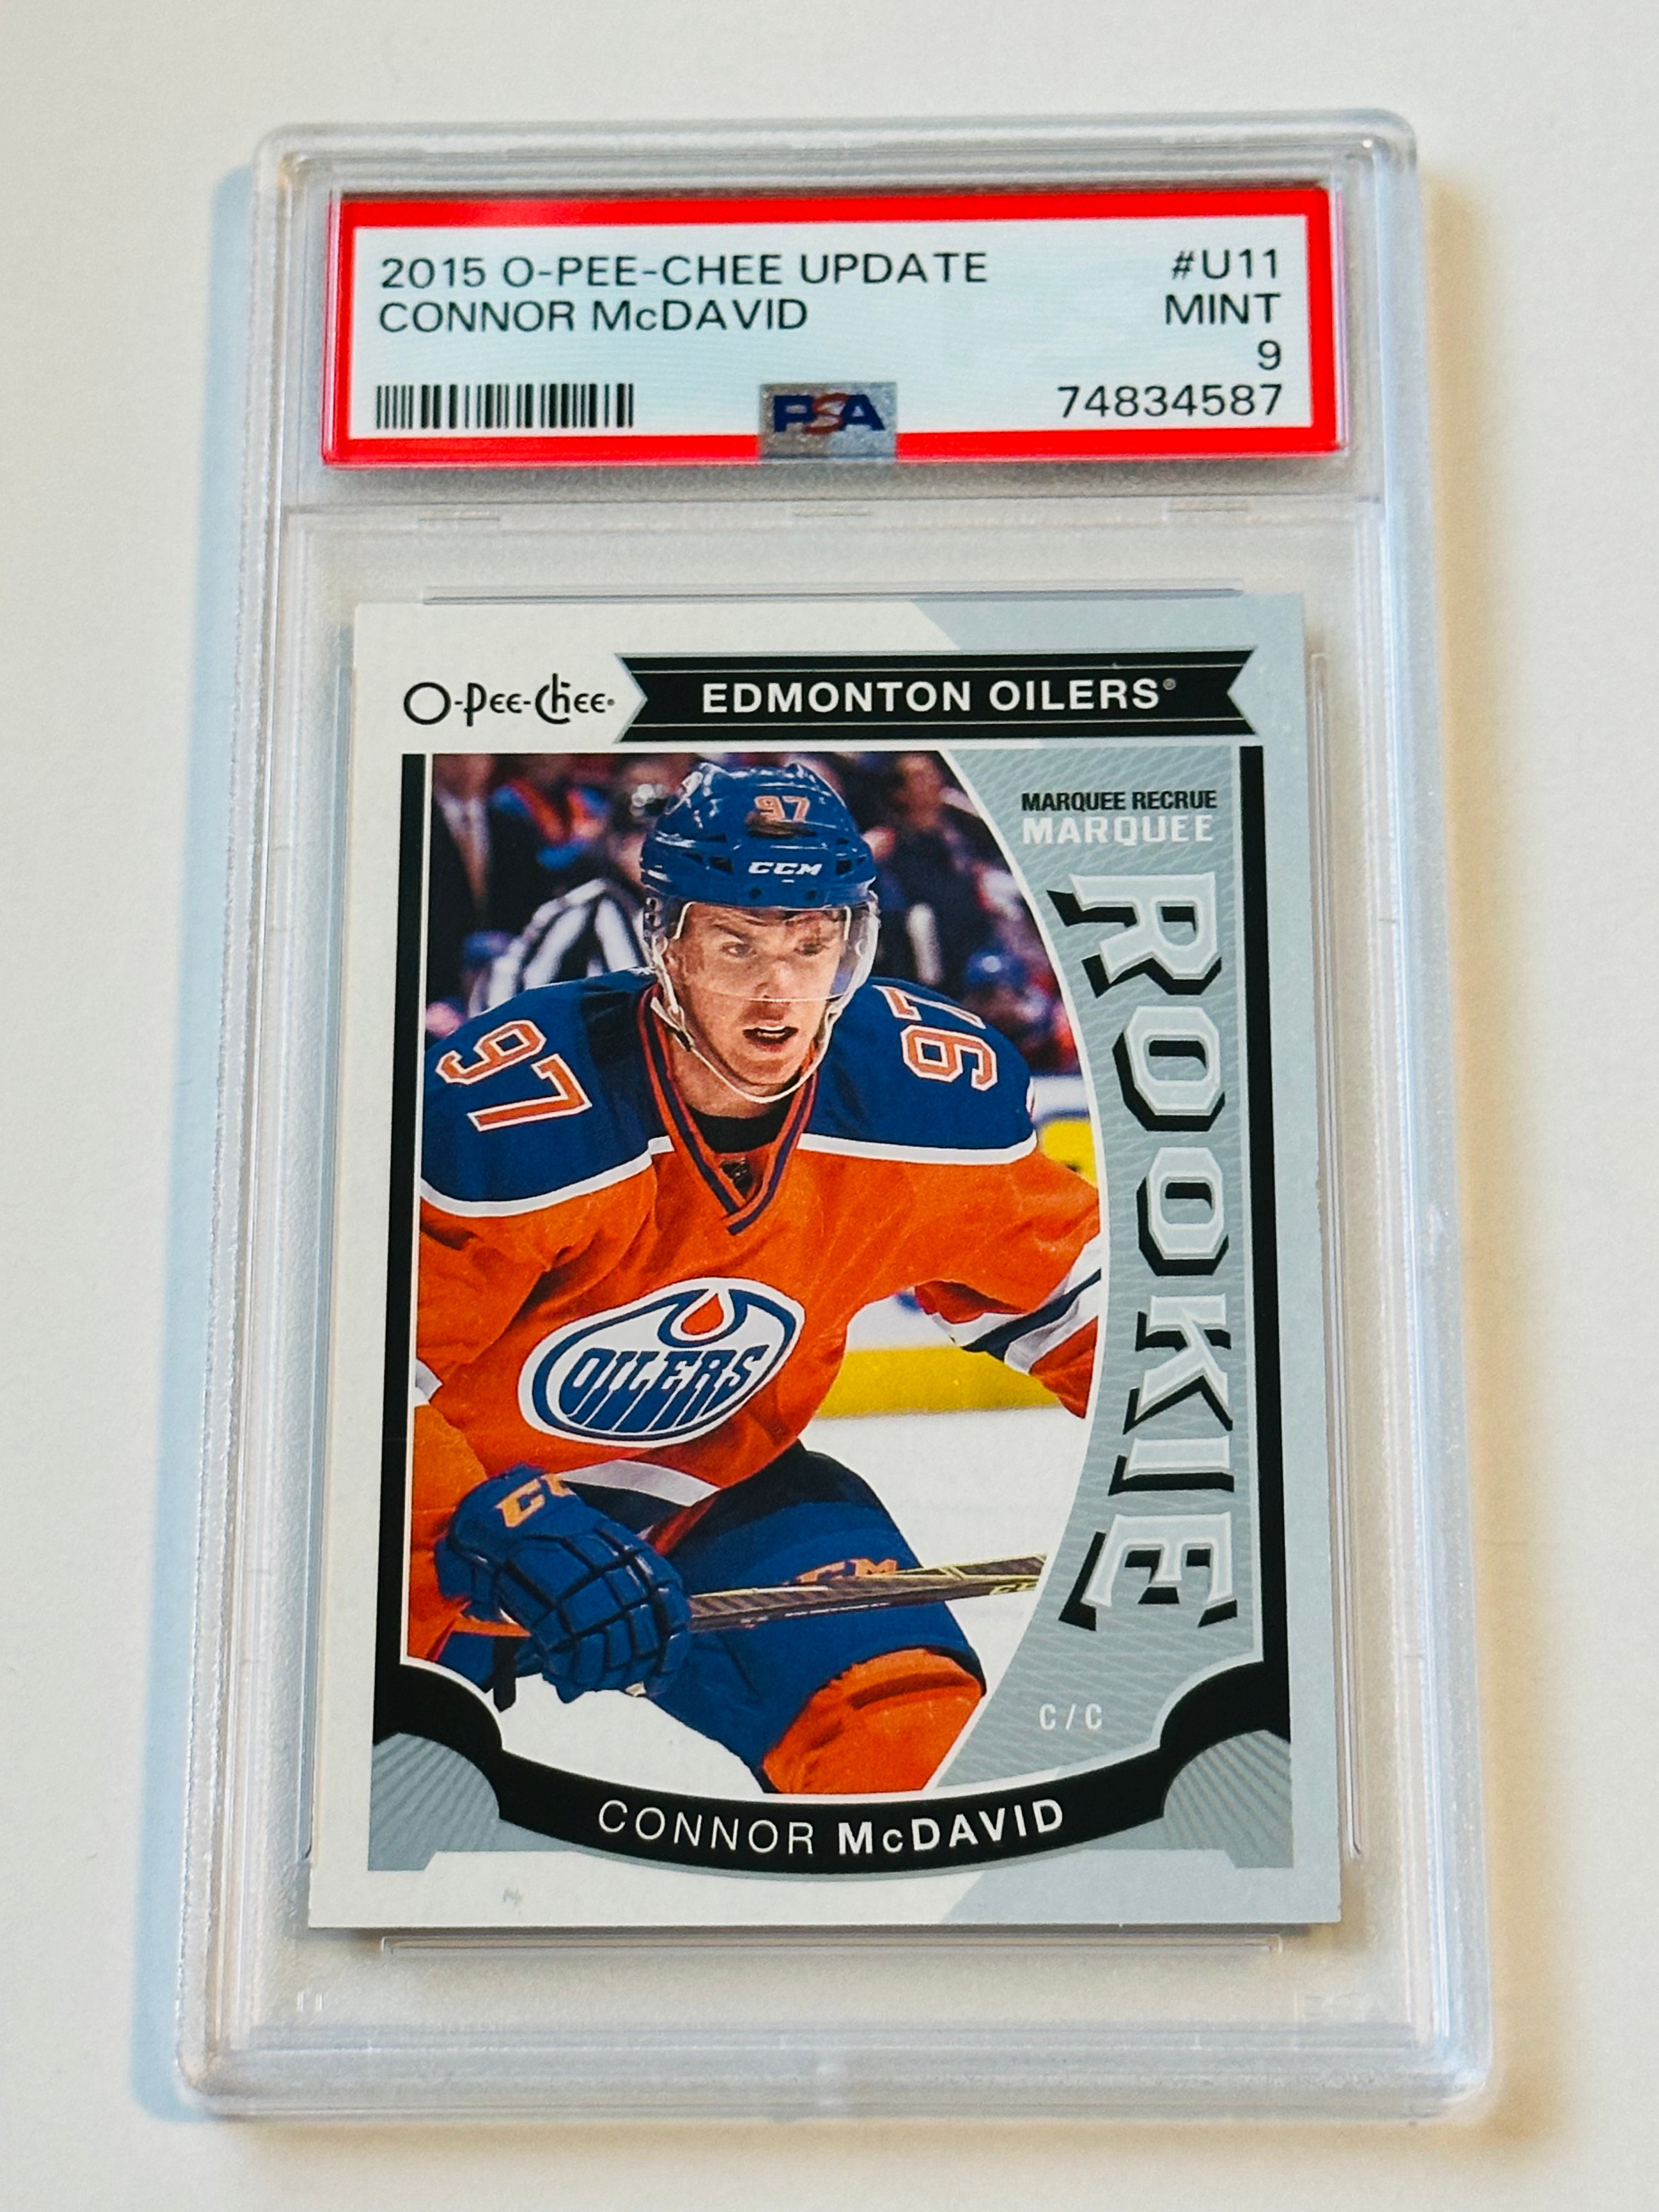 Connor McDavid Opc rookie update PSA 9 high graded card 2015